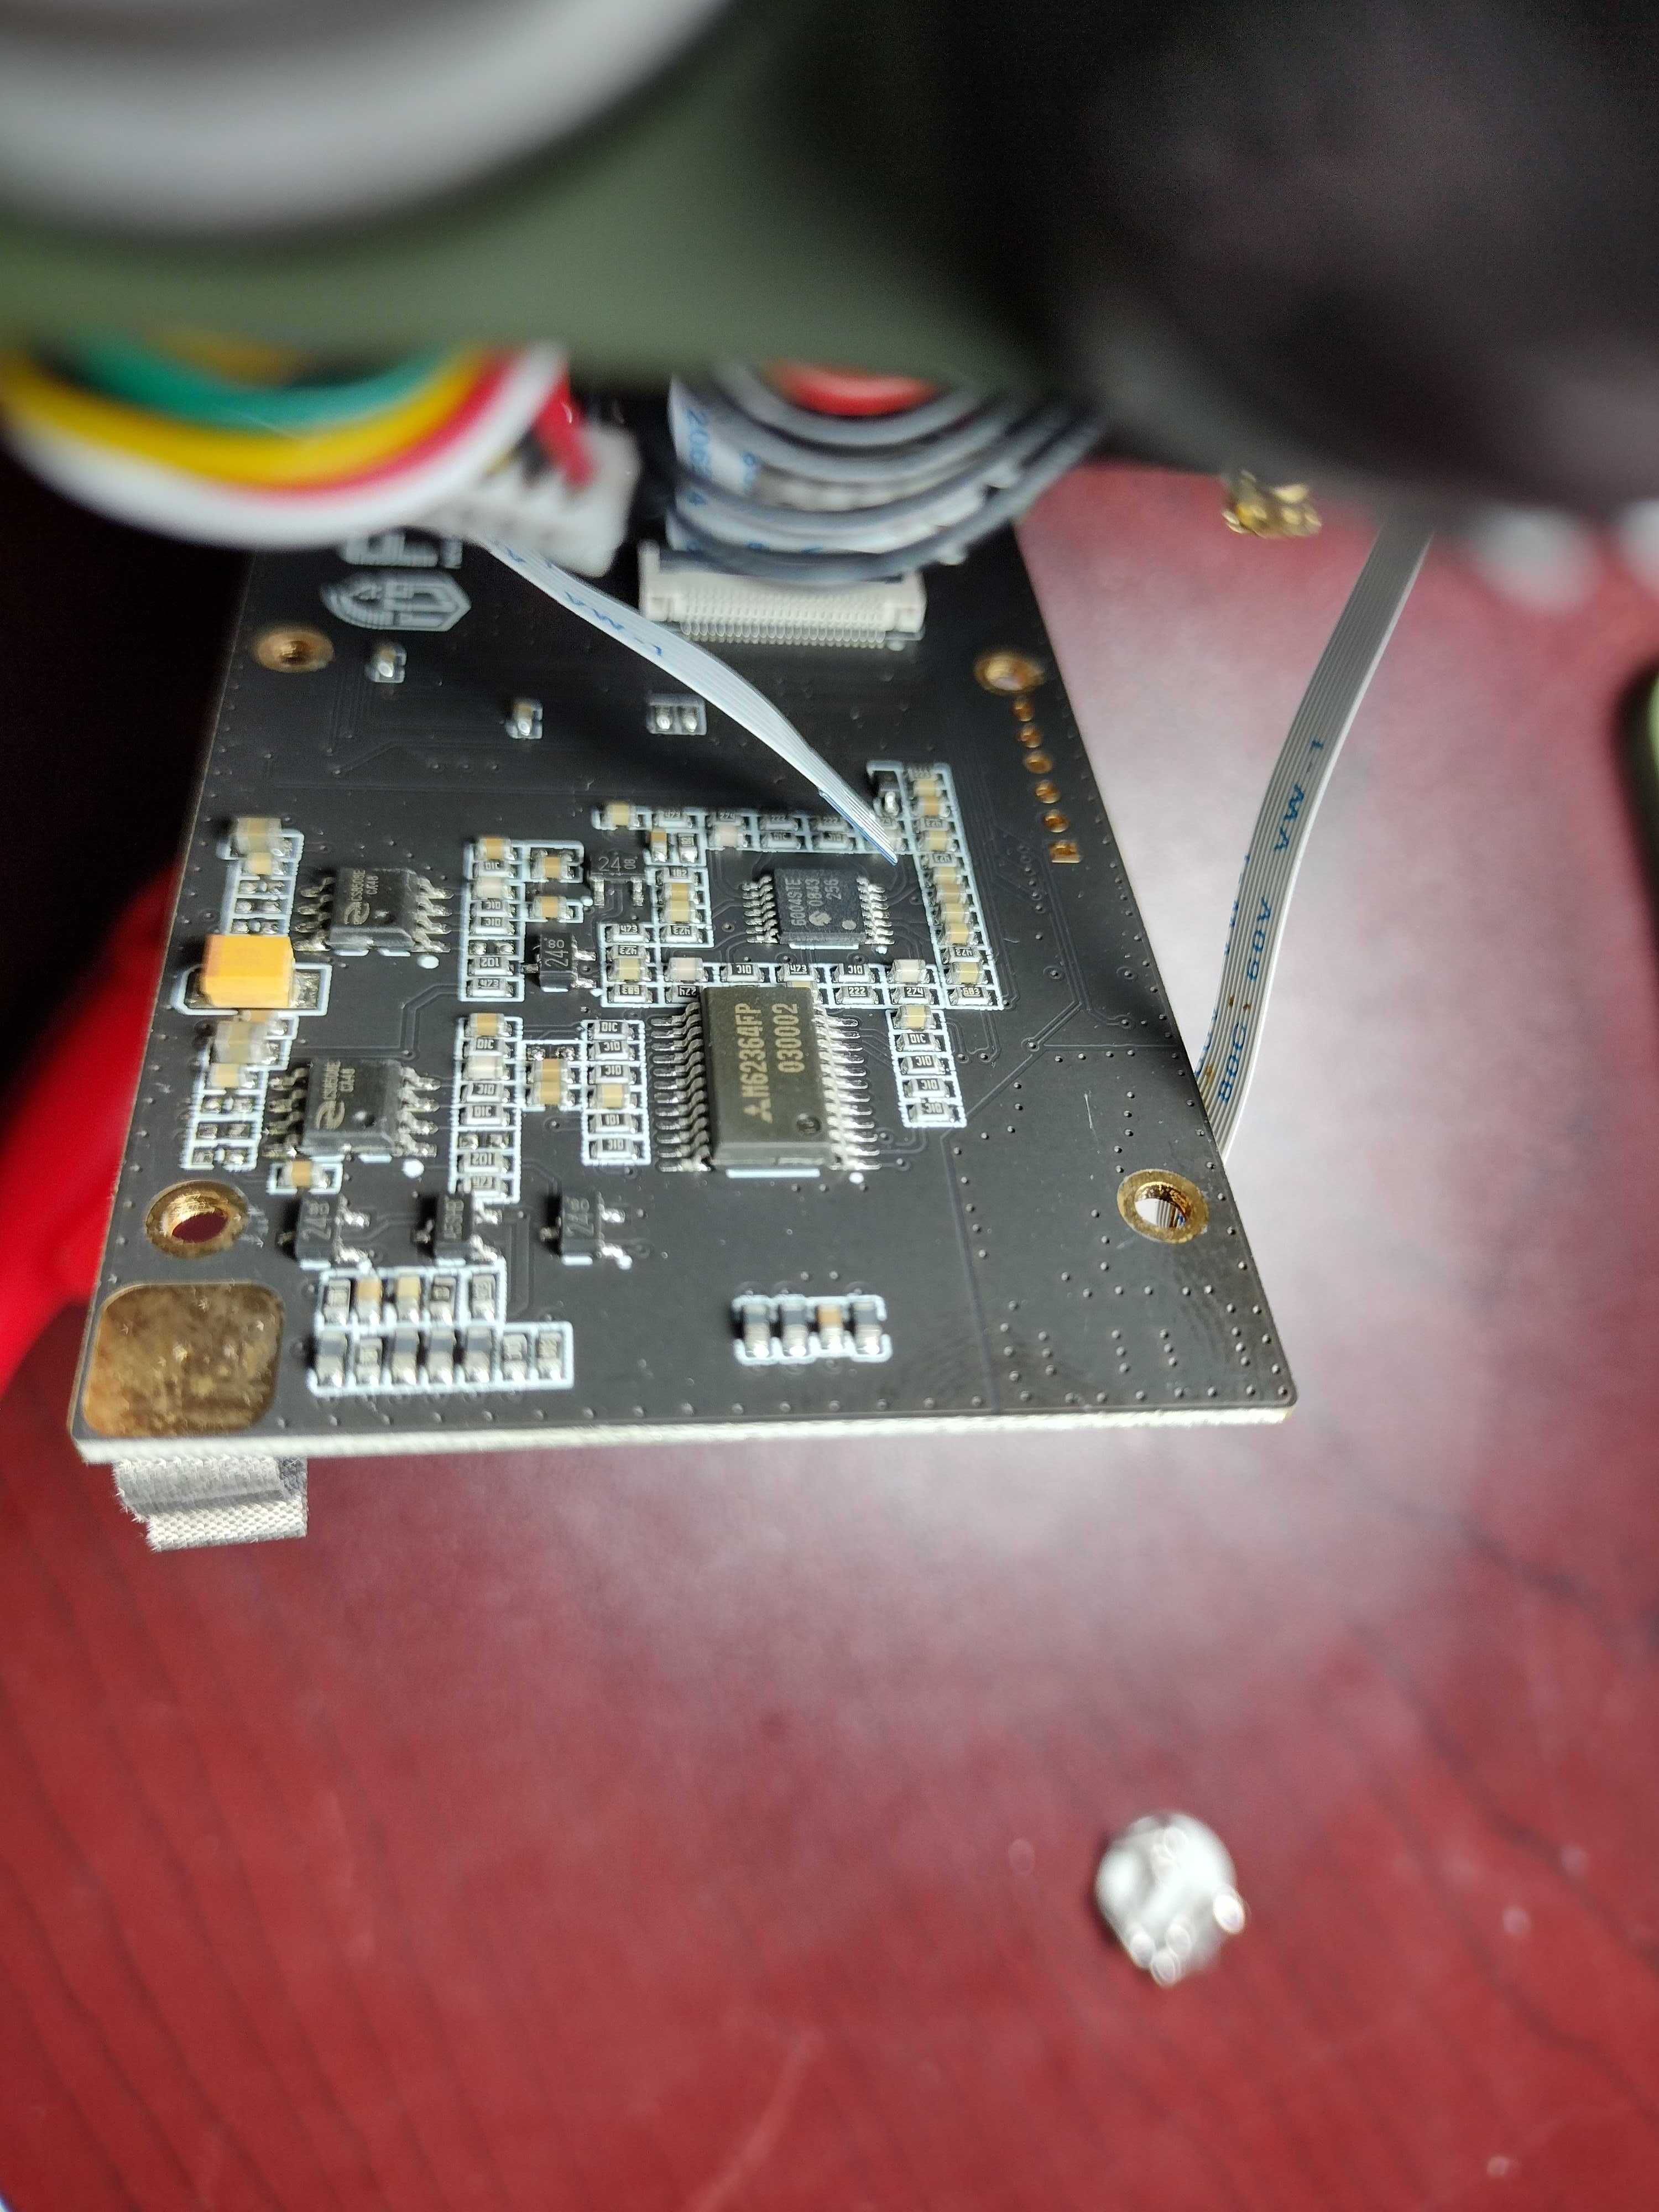 Peek at the back of the main board